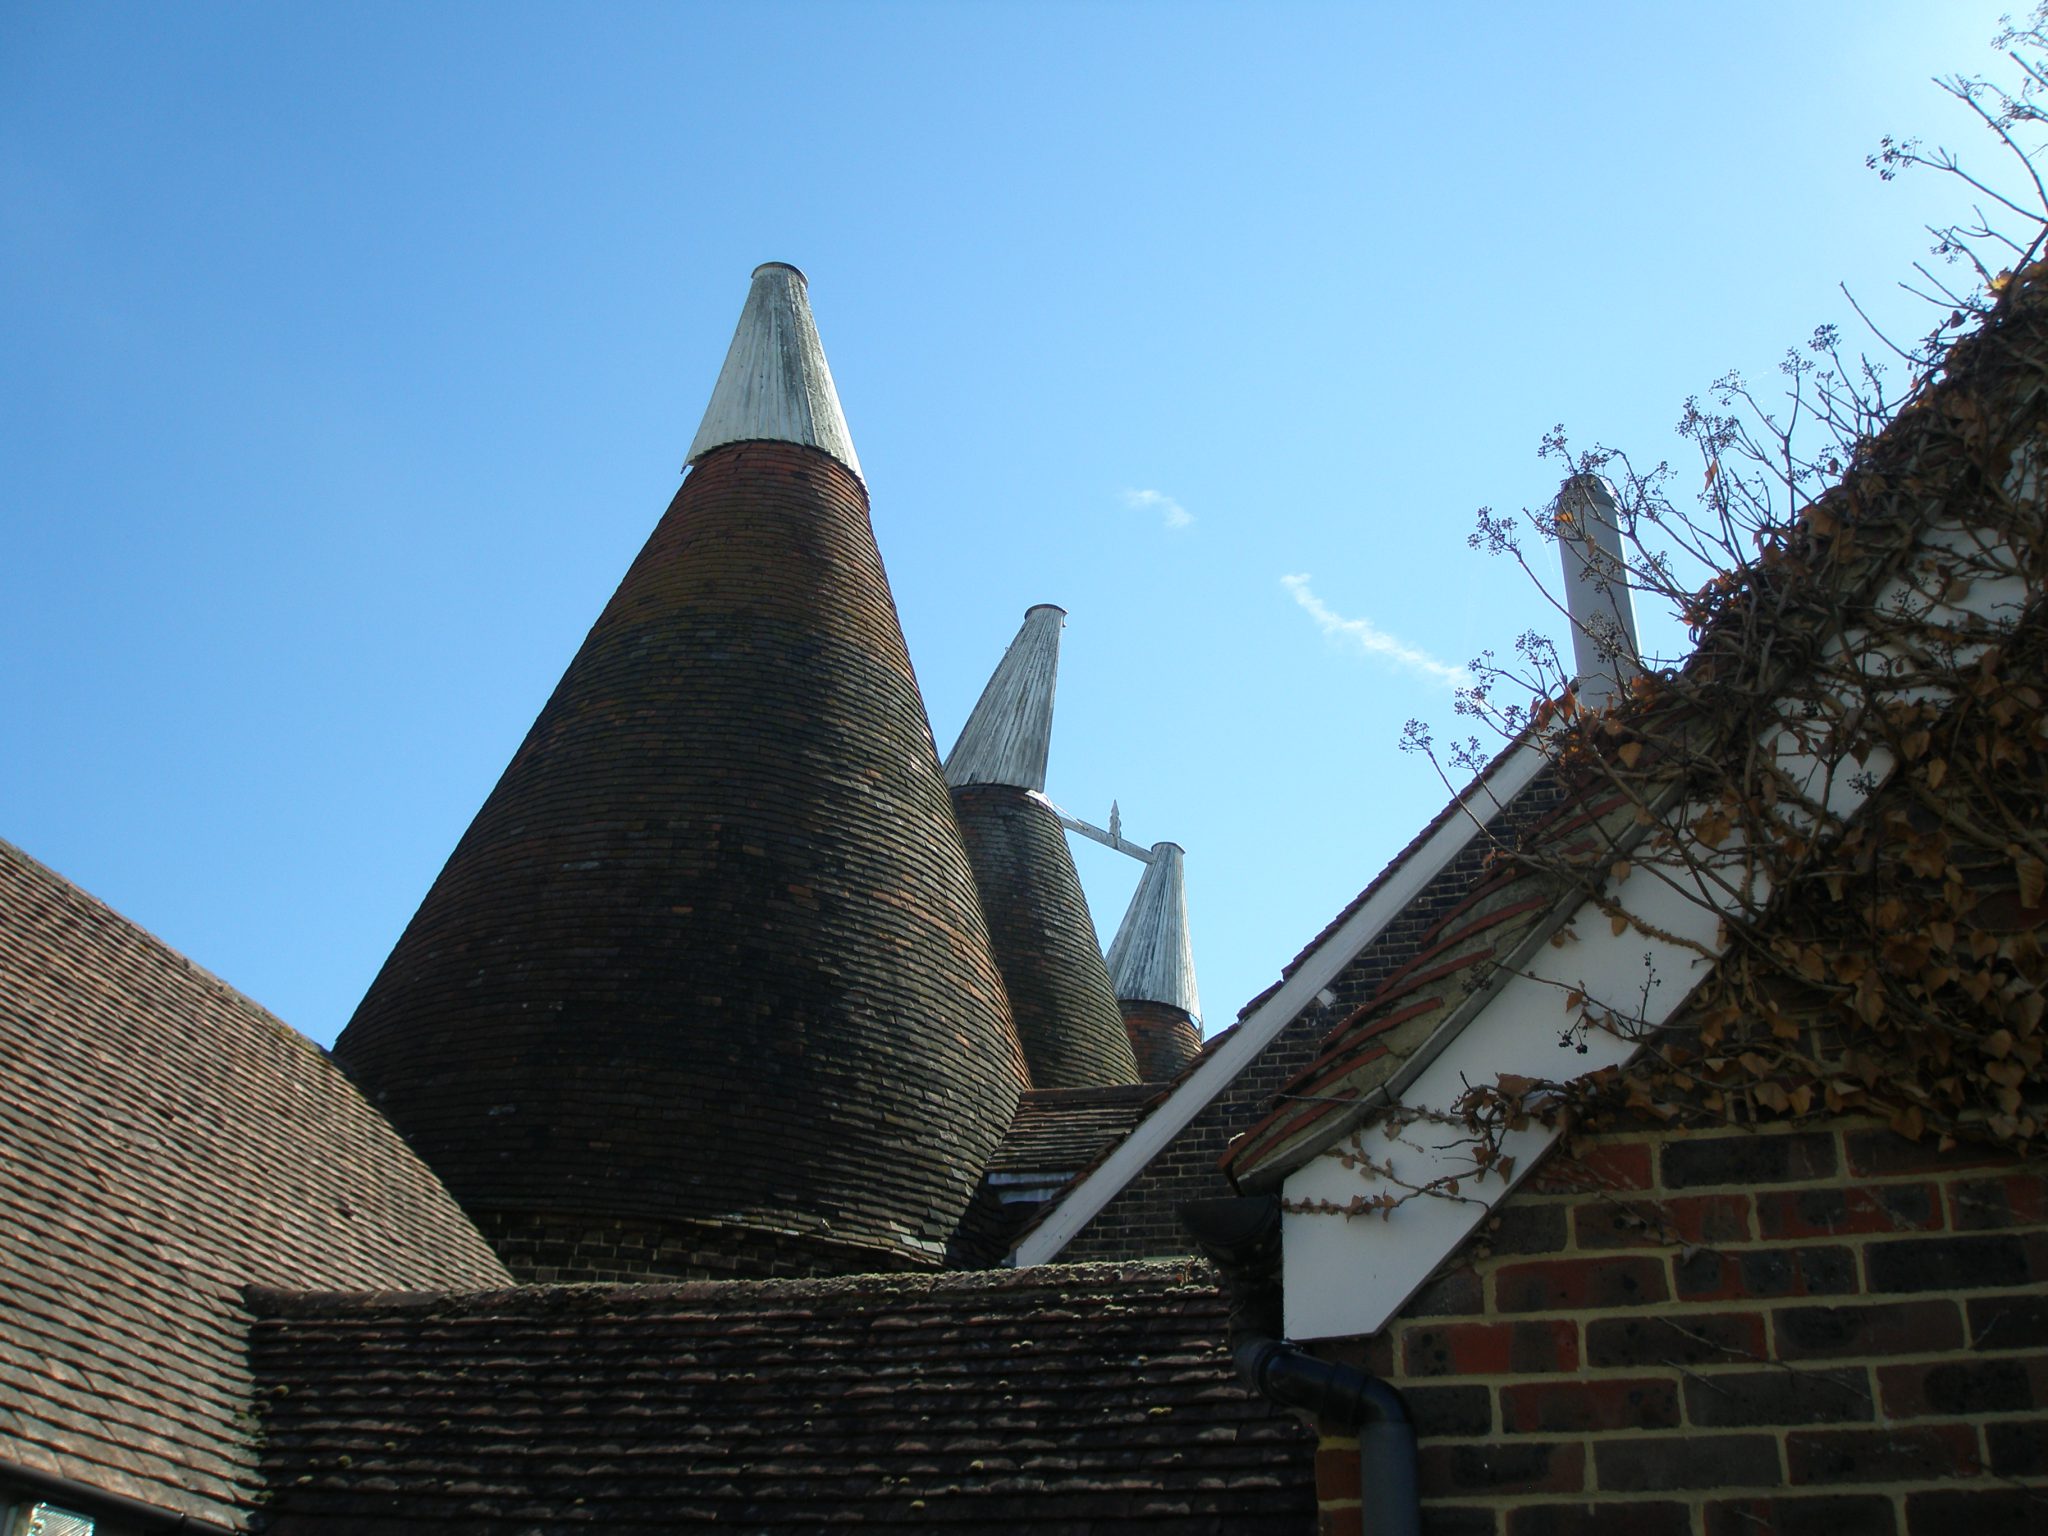 Oast roofs consist of: Roundel, Hot Air Outlet, Wind Vane, & Cowl.